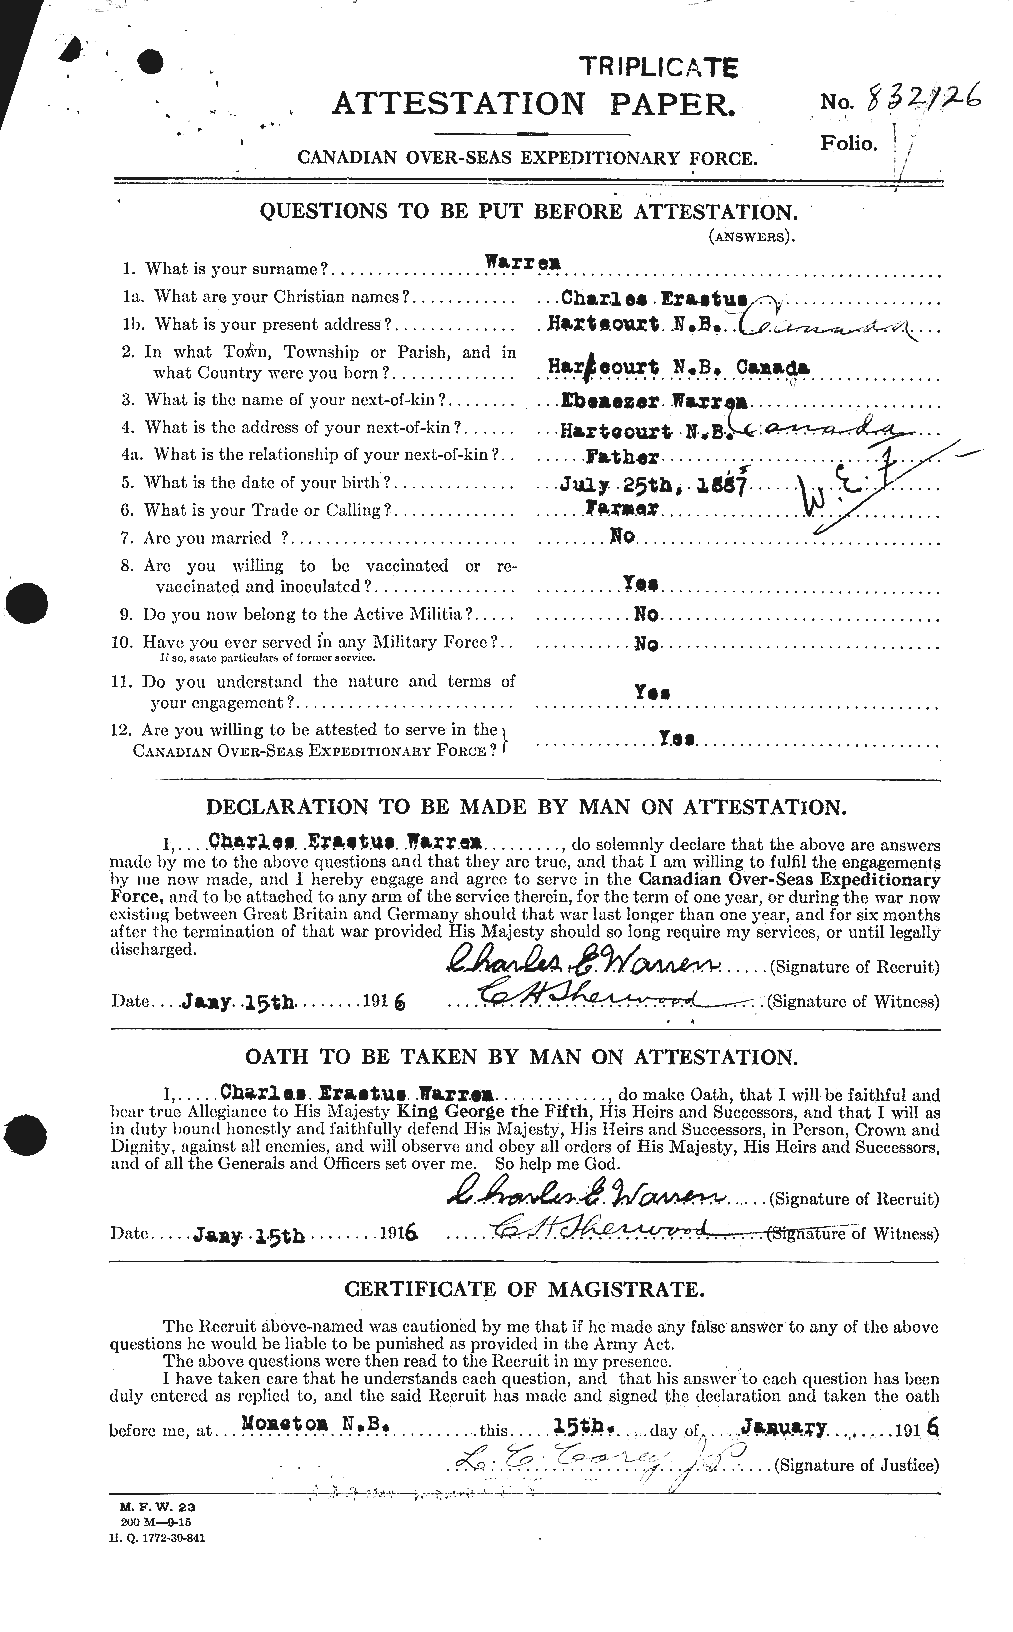 Personnel Records of the First World War - CEF 658389a